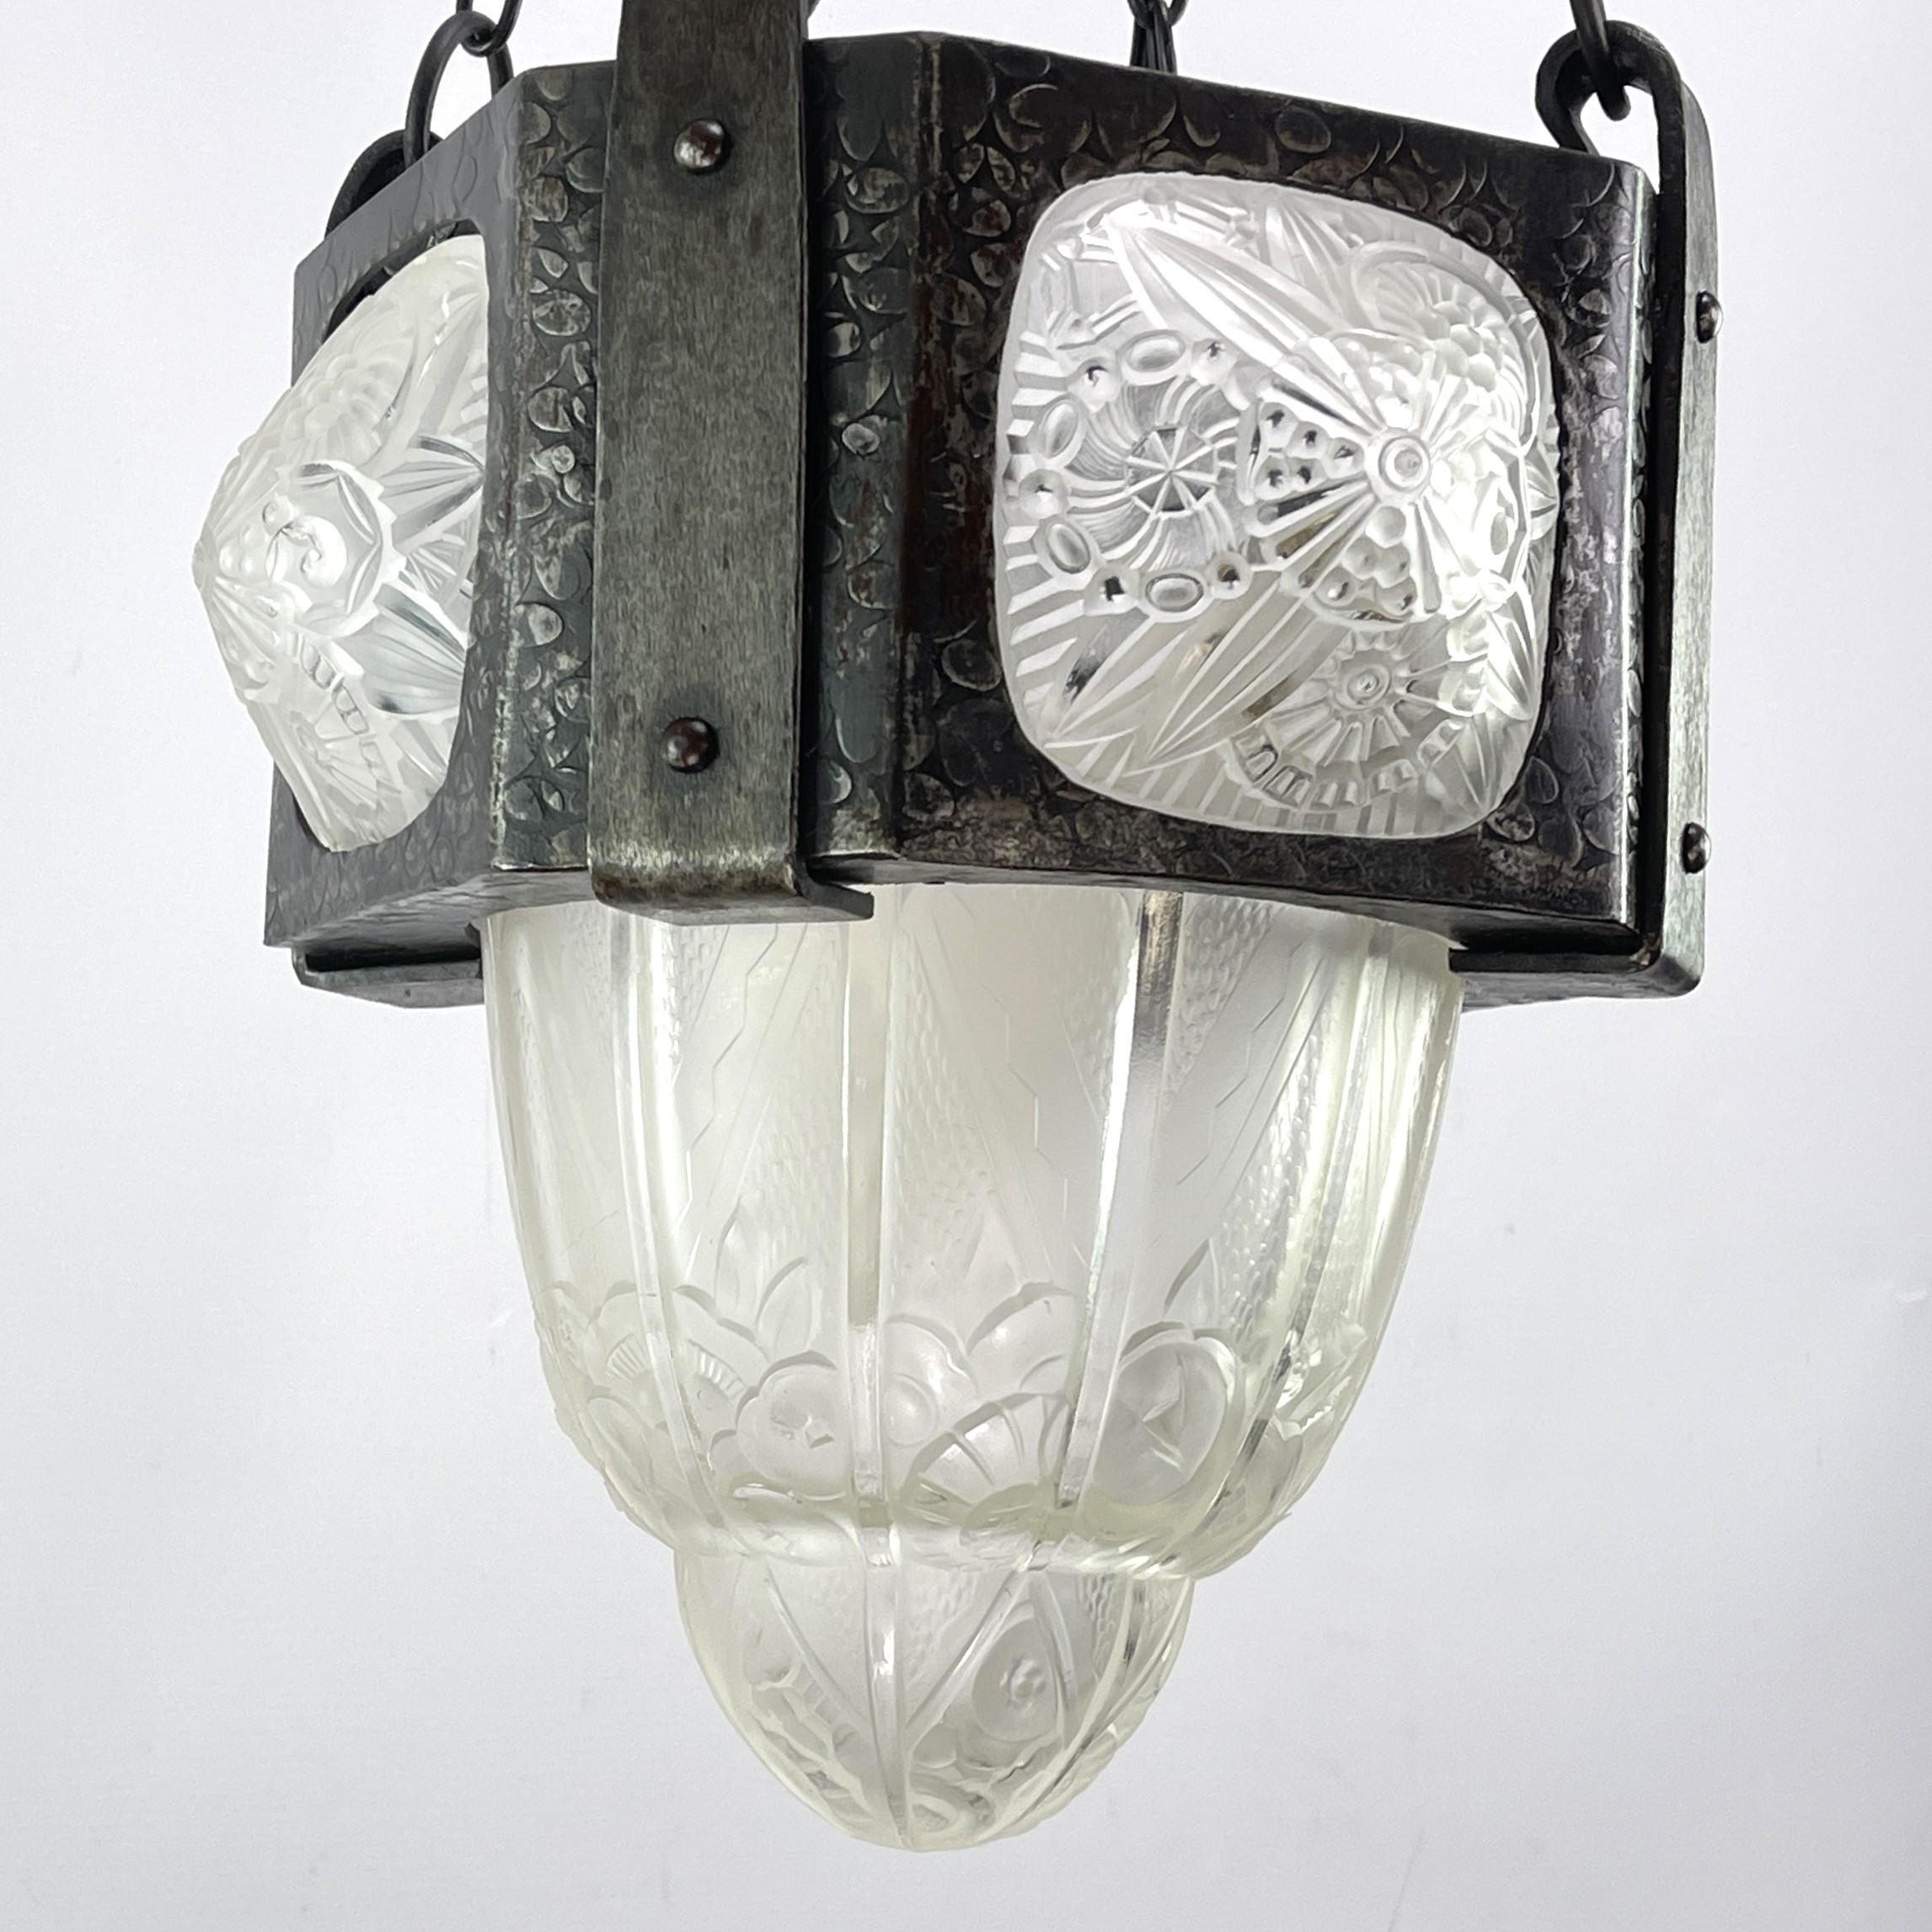 20th Century Art Deco Chandelier by Hettier & Vincent wrought iron, 1930s For Sale